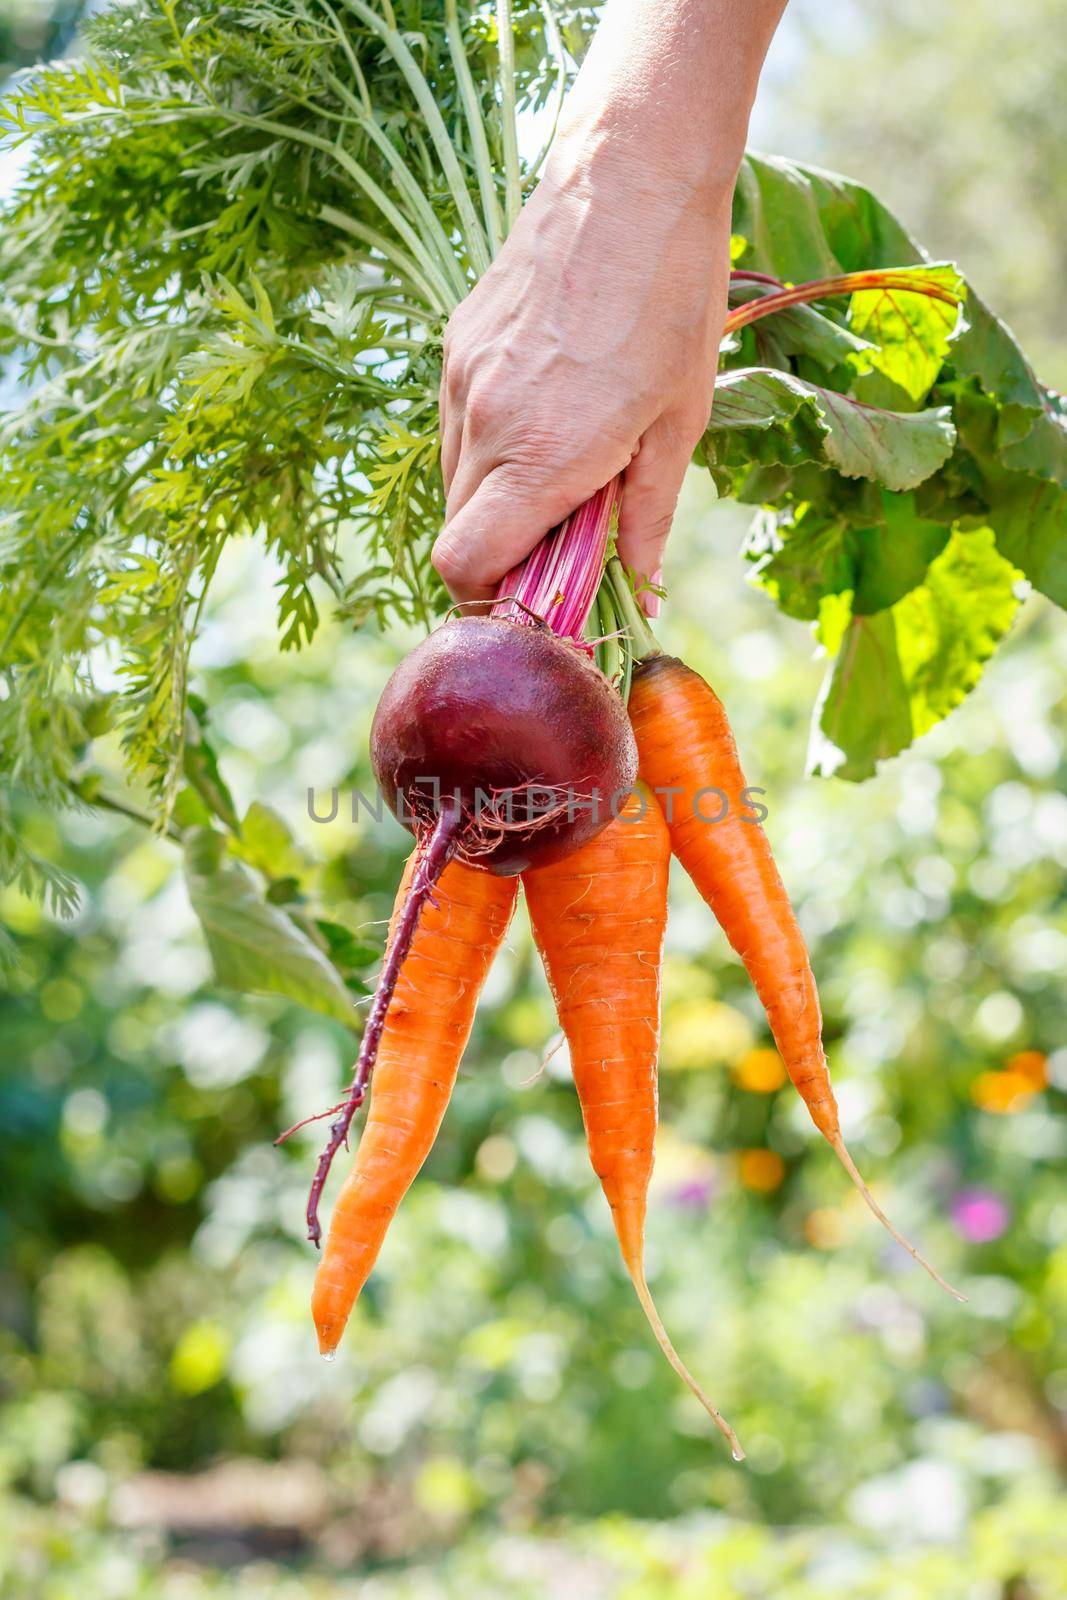 Female gardener's hand with the carrots and beetroot just picked in the garden. Just harvested fresh vegetable.